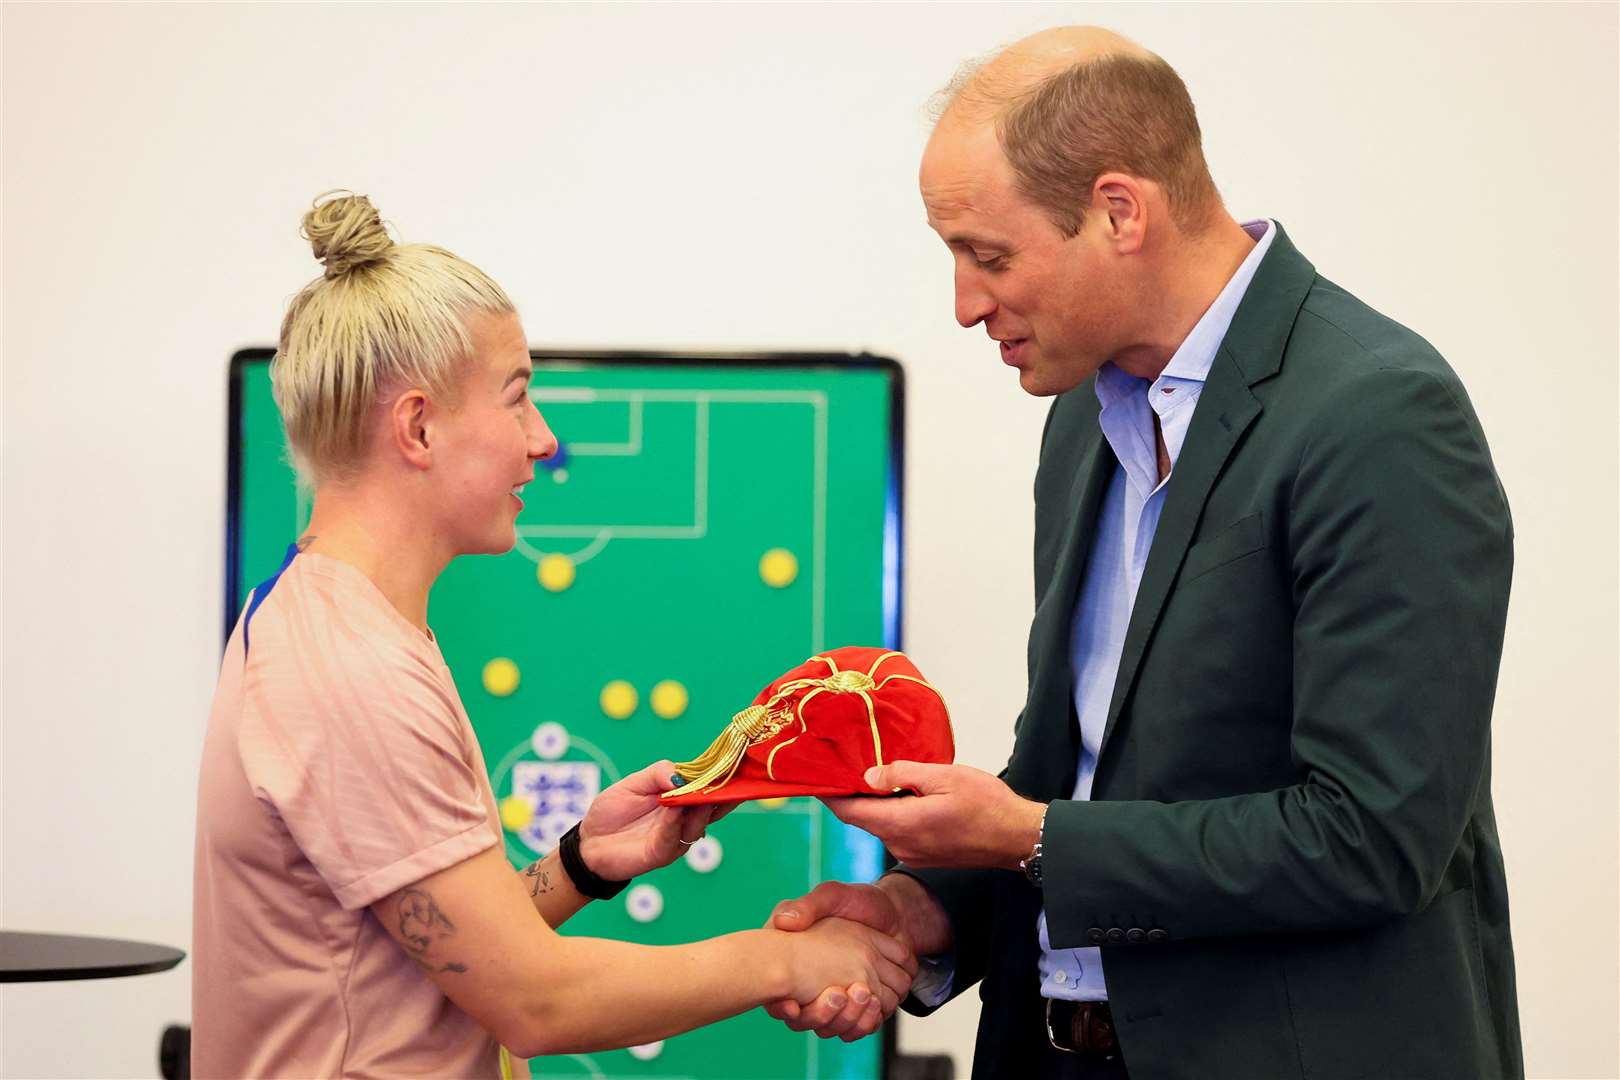 William presents a legacy cap to Bethany England, during a visit to St George’s Park (Phil Noble/PA)